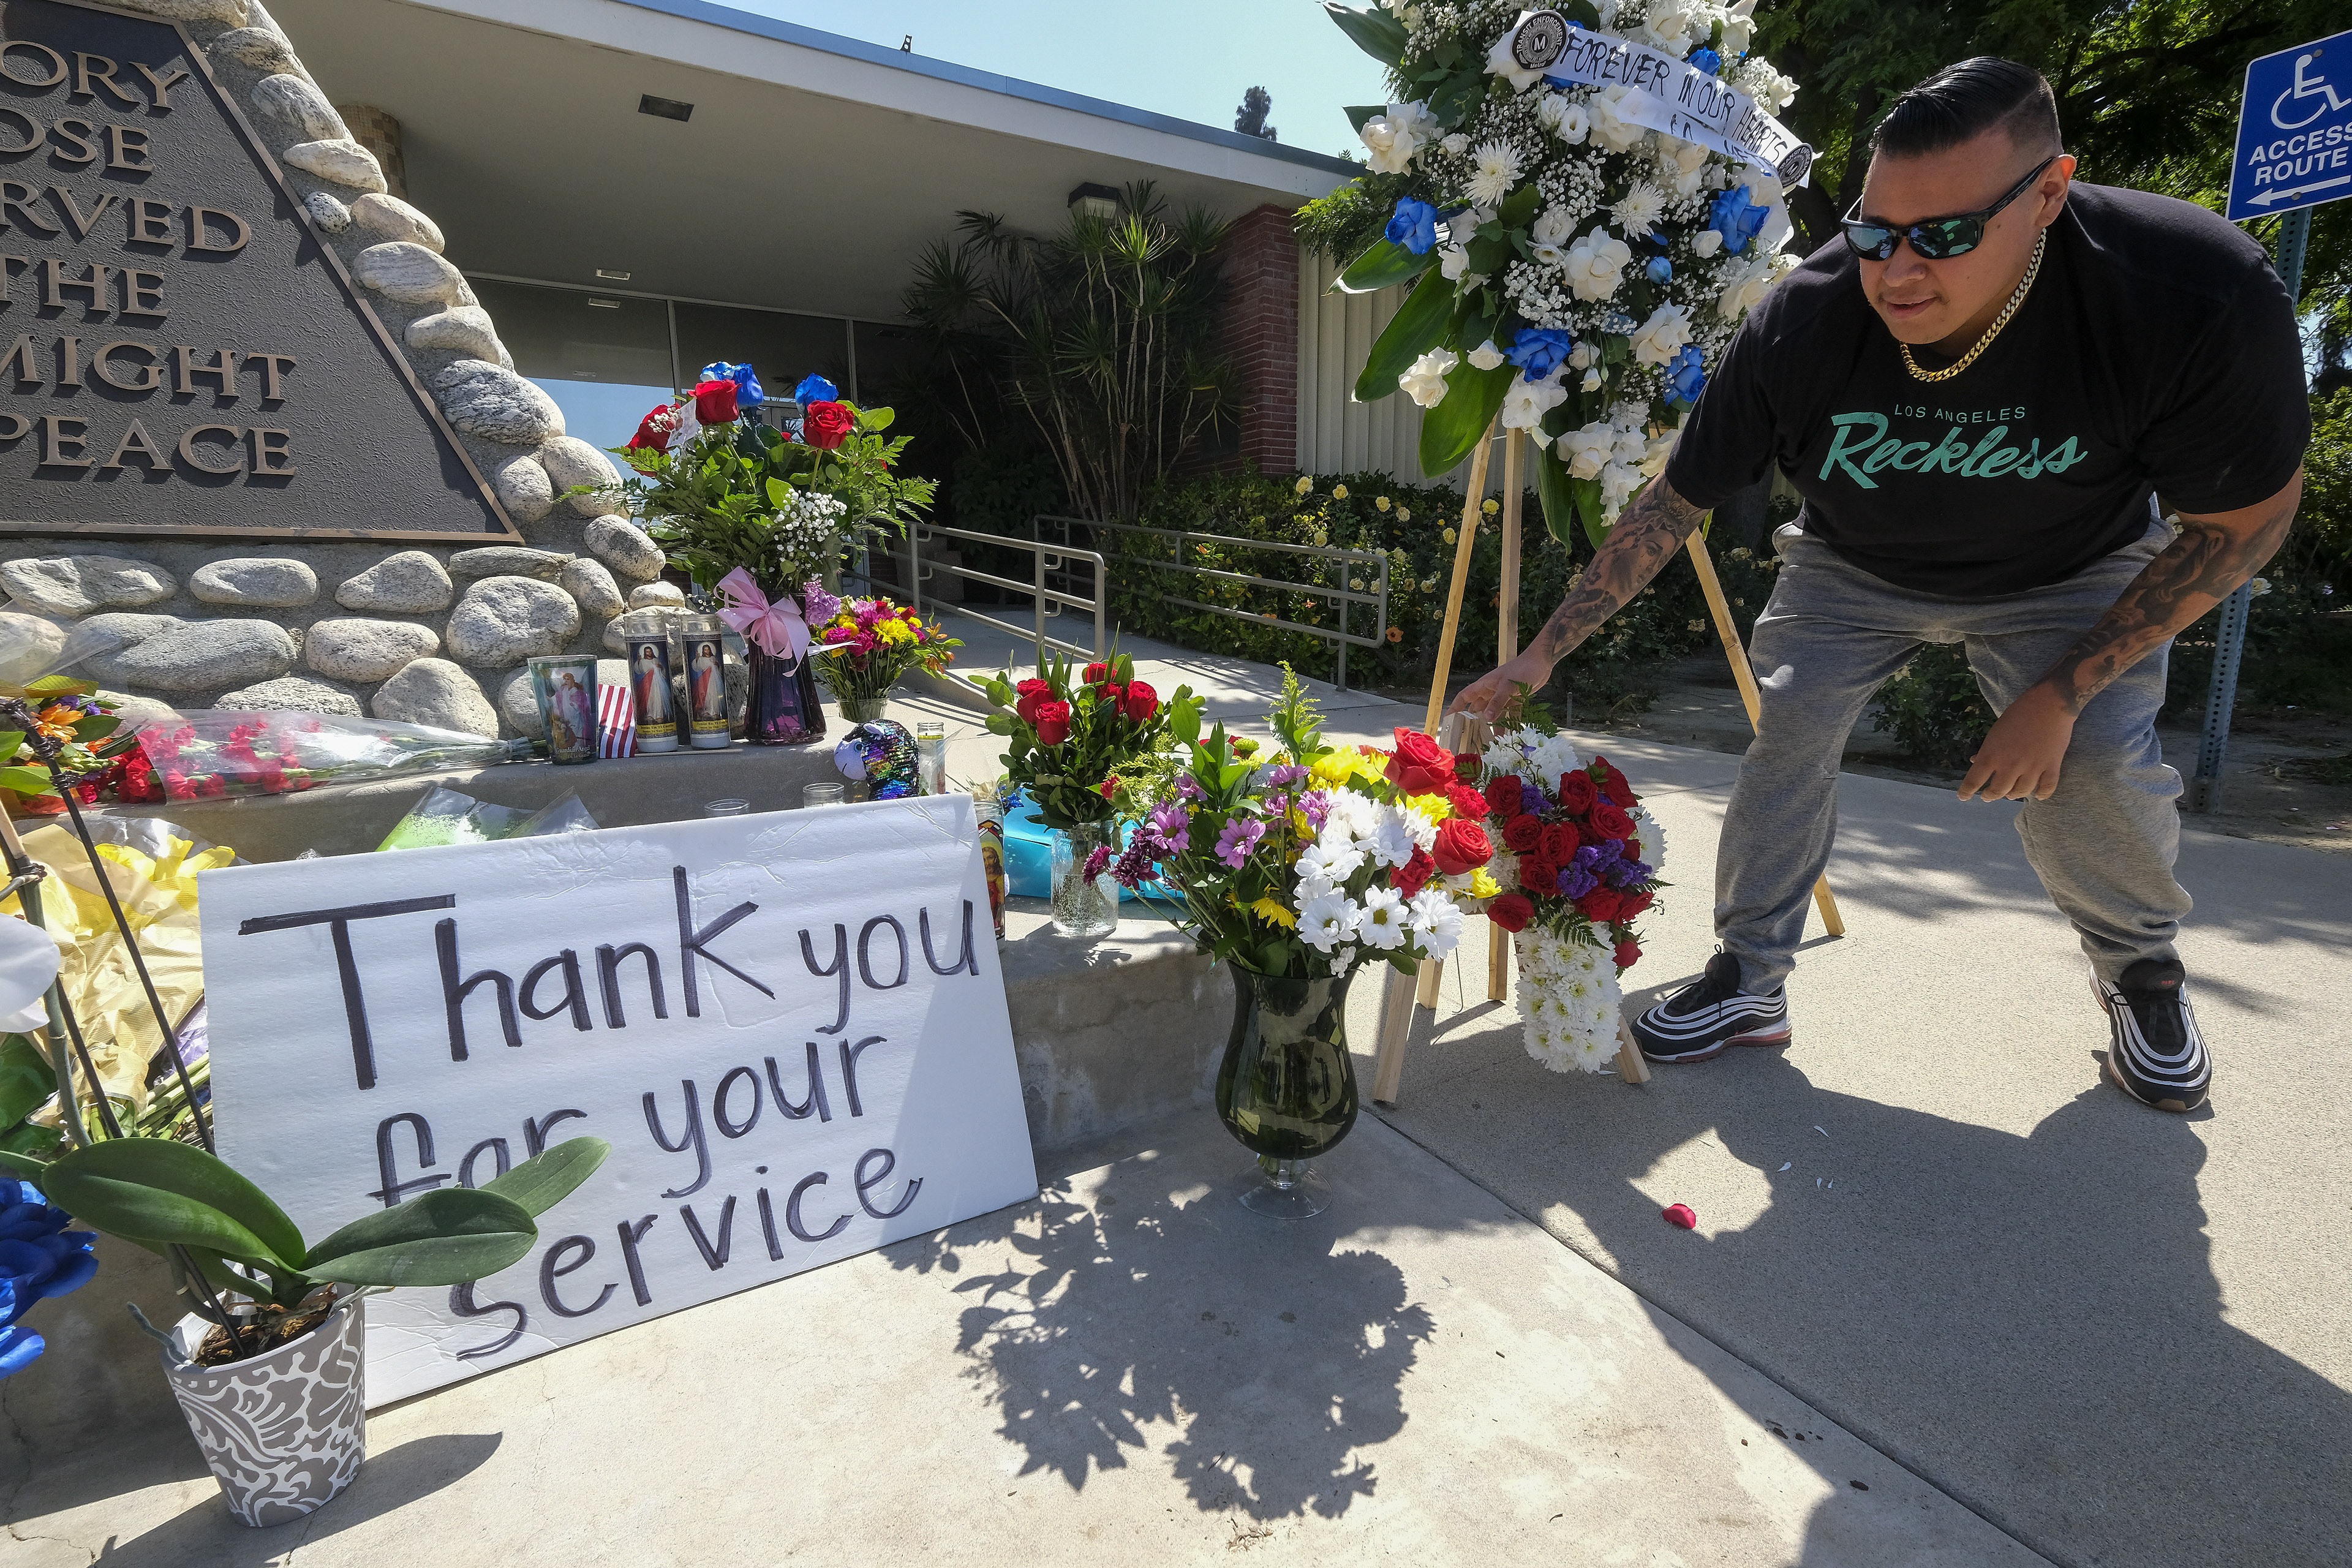 A man places flowers at a memorial Wednesday, June 15, 2022, outside El Monte City Hall for two police officers who were shot and killed Tuesday, at a motel in El Monte, Calif. The two police officers were killed in a shootout while investigating a possible stabbing in the suburban Los Angeles motel, and the suspect died at the scene, authorities said. (AP Photo/Ringo H.W. Chiu)